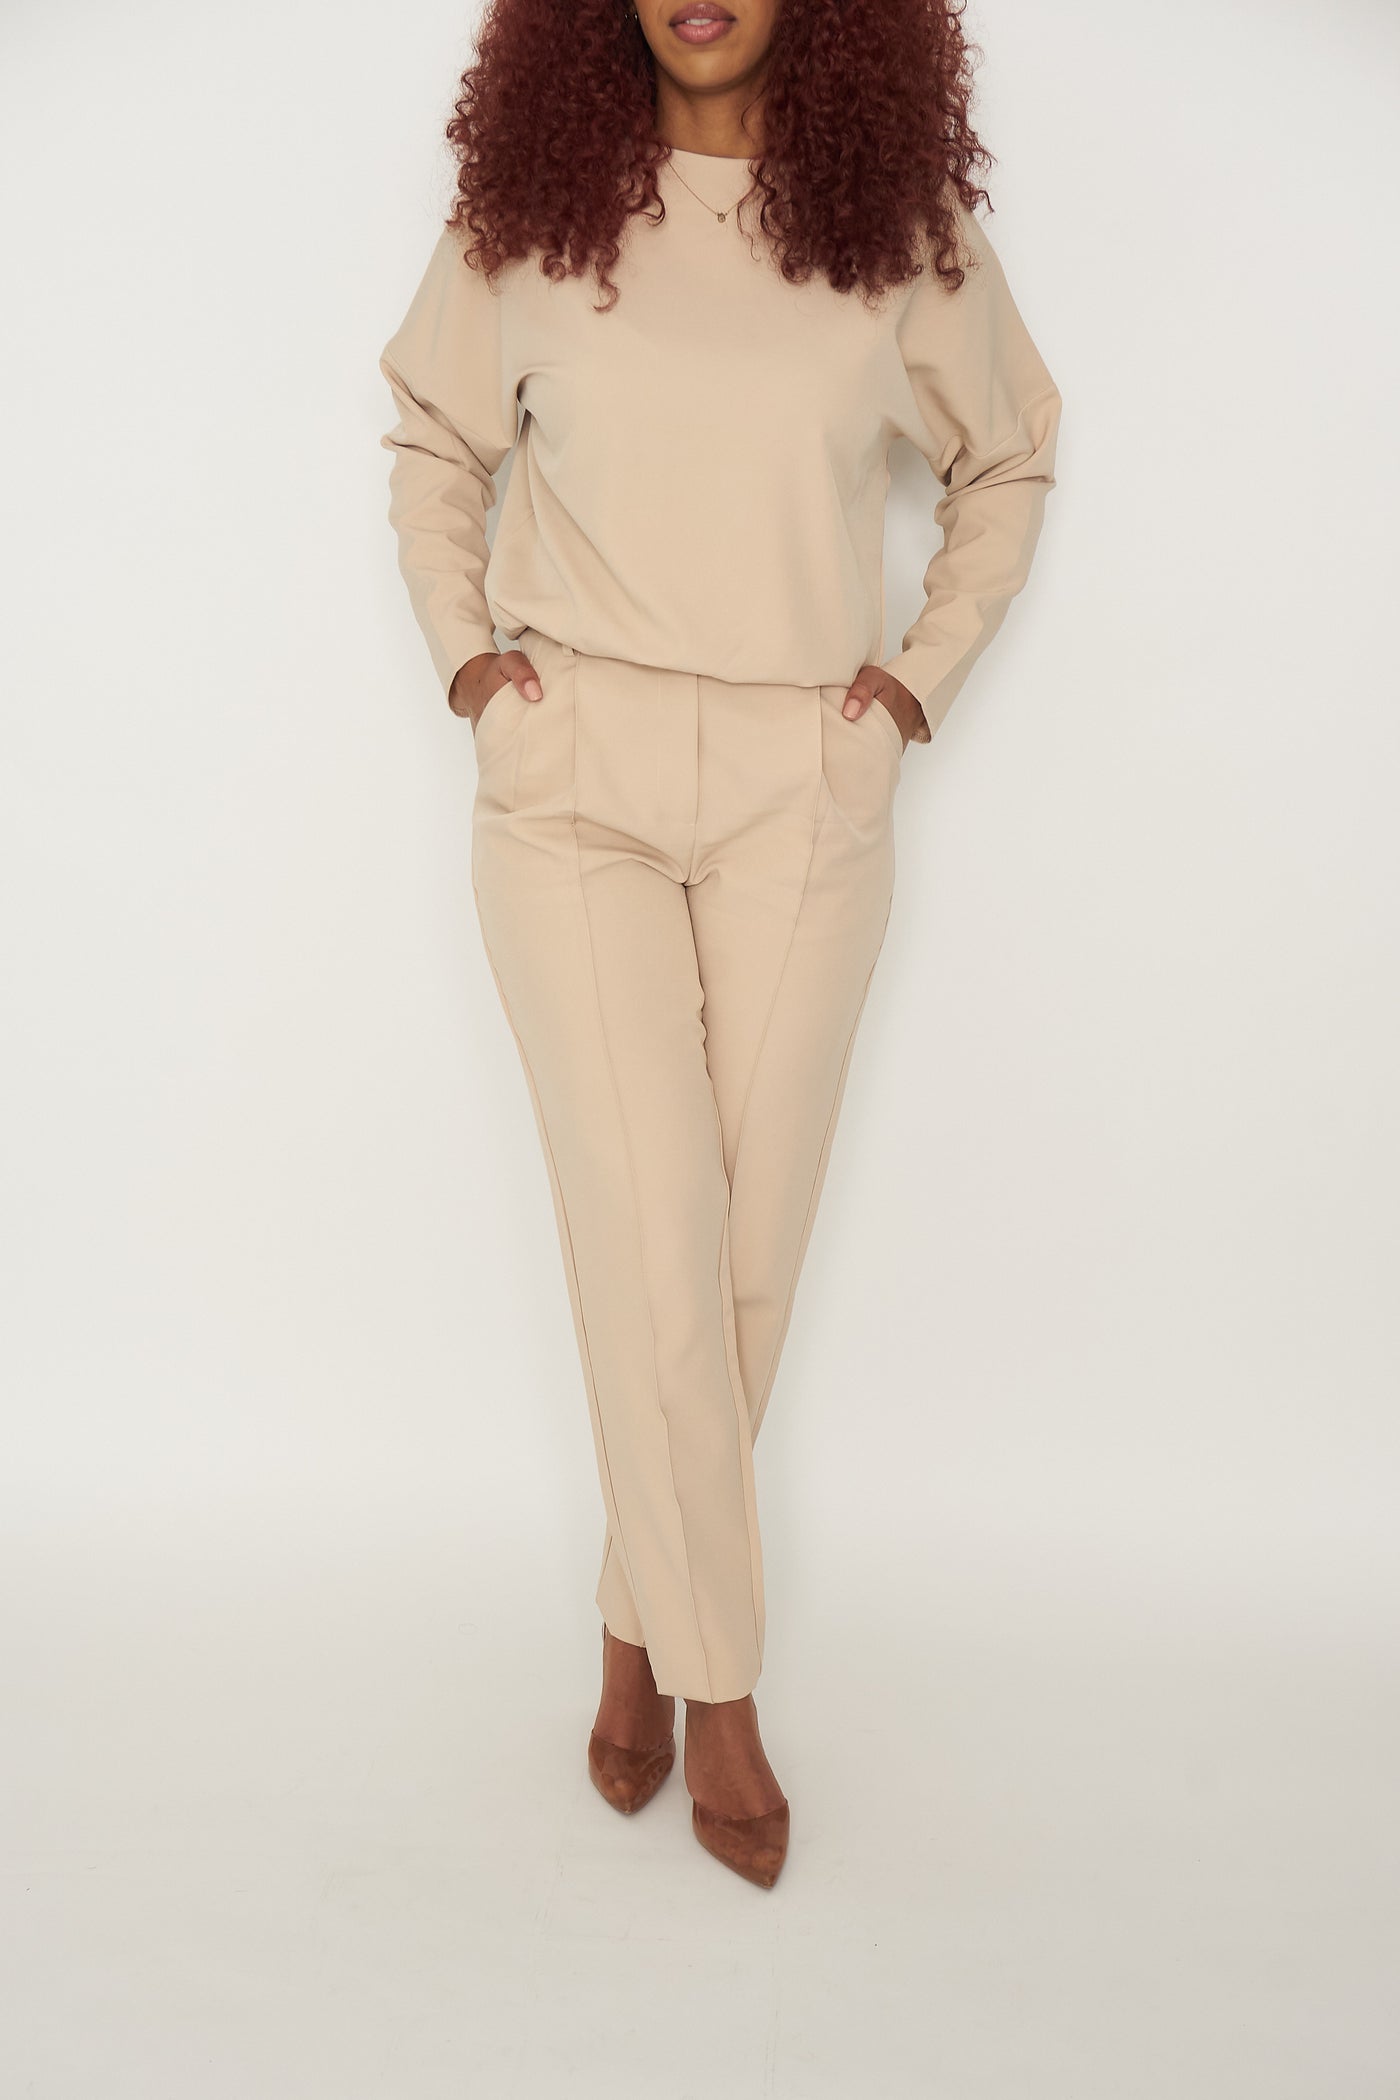 The Classy Girl Set is beige and comes with a long sleeve top that has a waistband bottom to always give the “tucked-in'' look without needing to tuck in the top. The bottoms come with zipper and button front with belt loops,